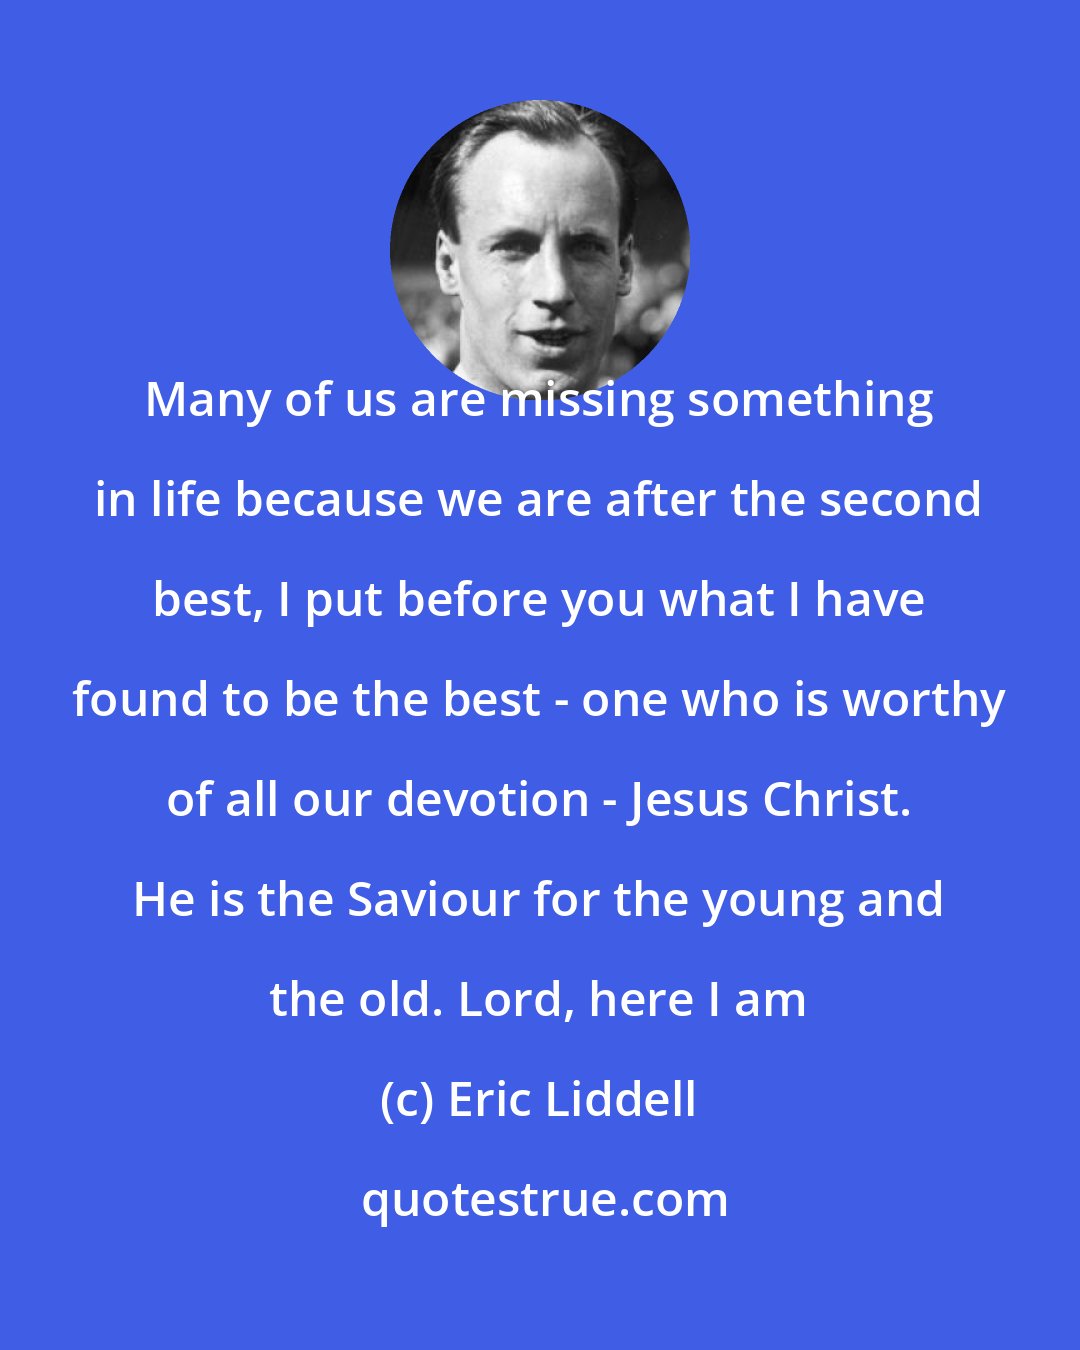 Eric Liddell: Many of us are missing something in life because we are after the second best, I put before you what I have found to be the best - one who is worthy of all our devotion - Jesus Christ. He is the Saviour for the young and the old. Lord, here I am